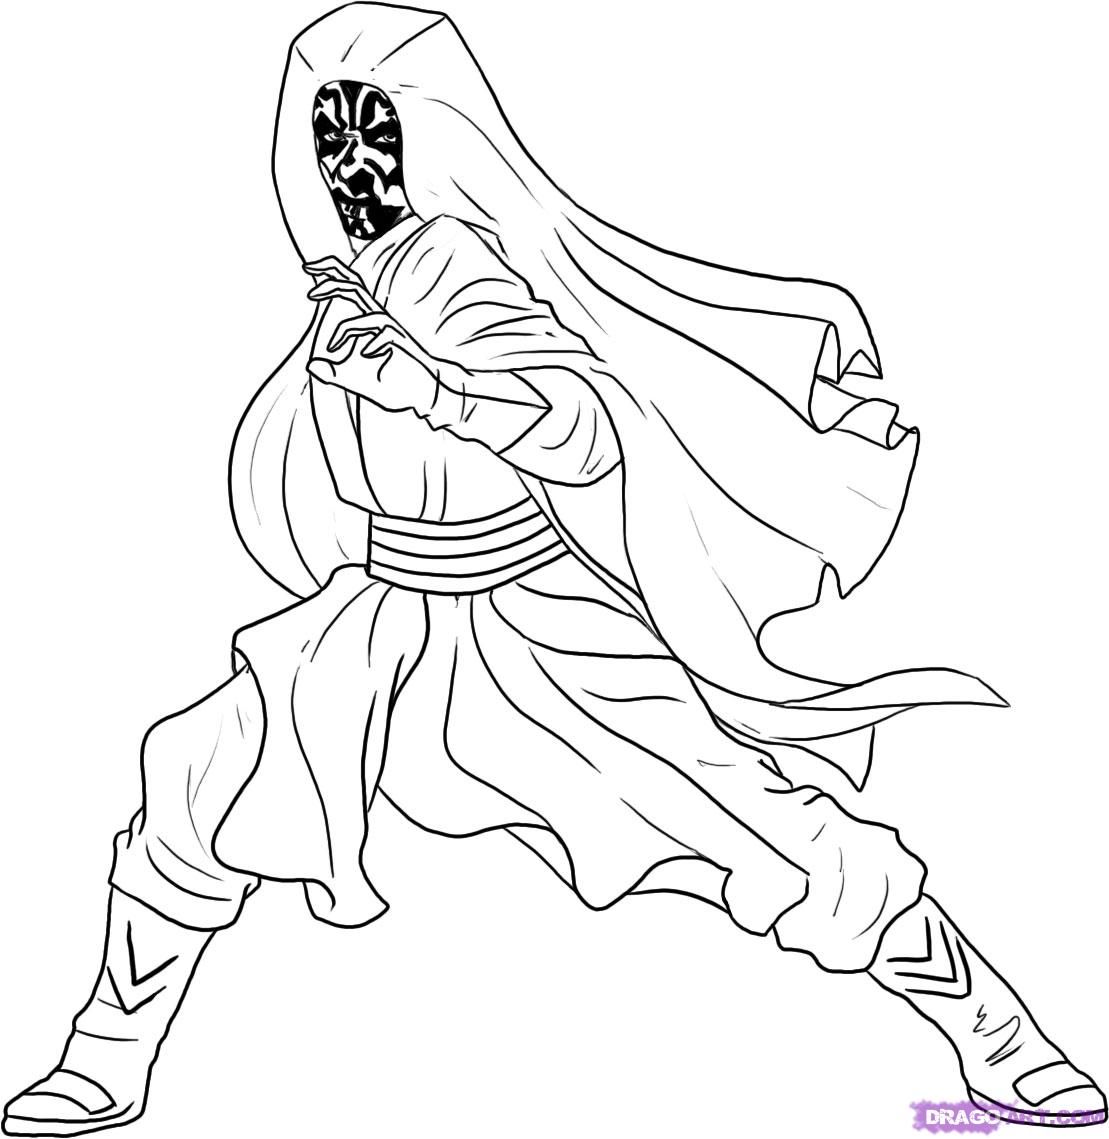 11 Pics of Star Wars Mask Coloring Pages - Stormtrooper Star Wars ...